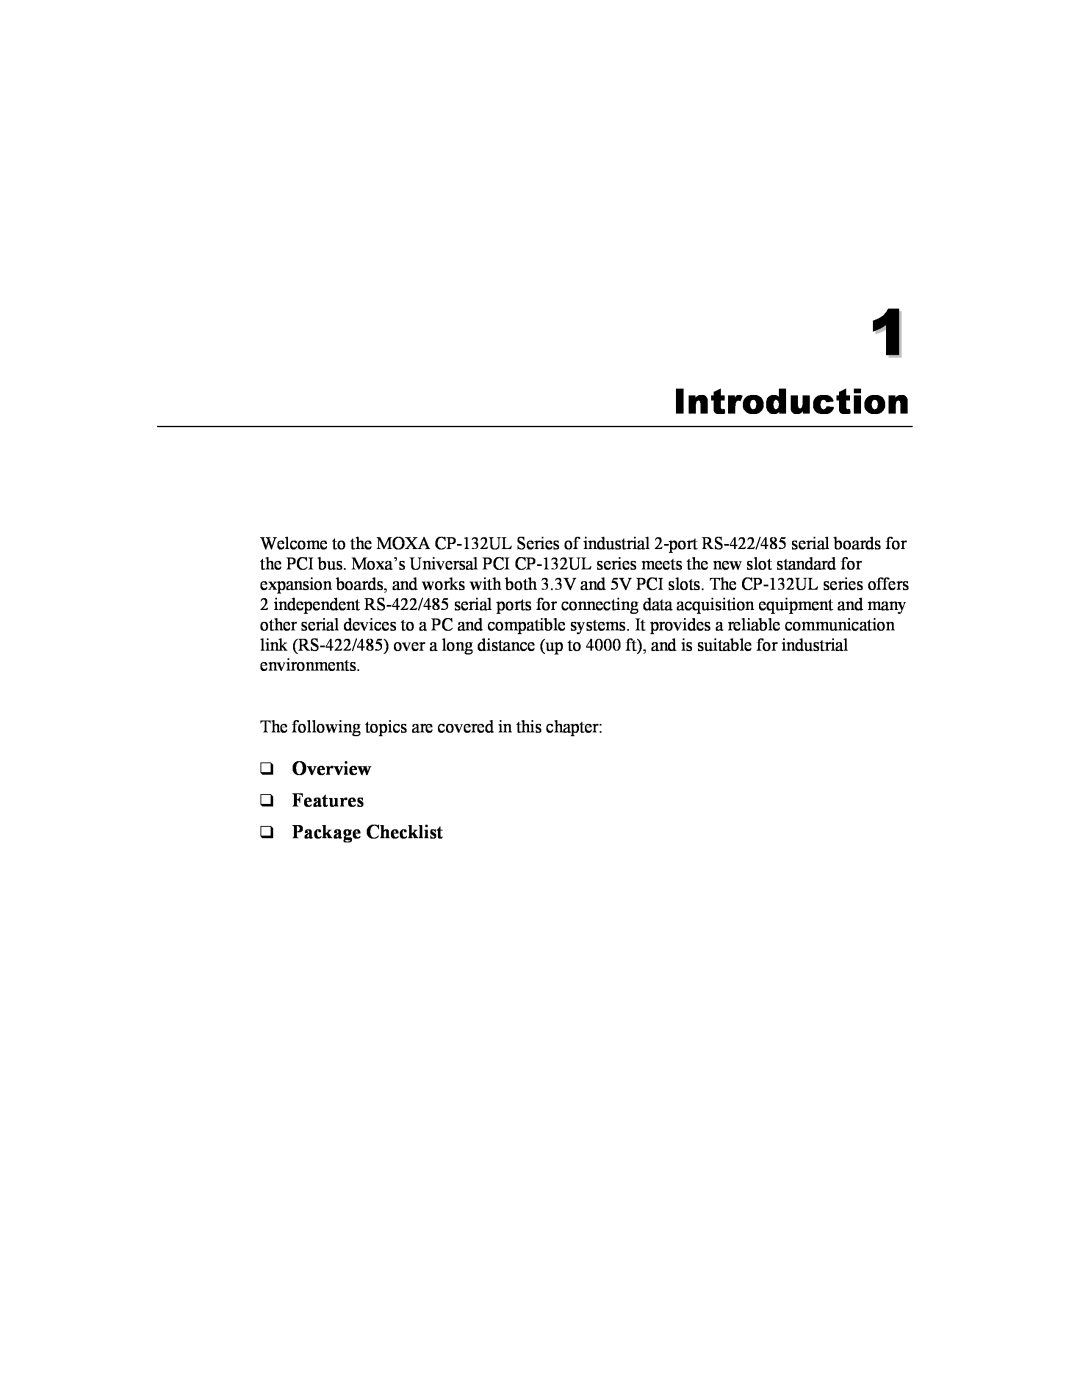 Moxa Technologies CP-132U Series user manual Introduction, Overview Features Package Checklist 